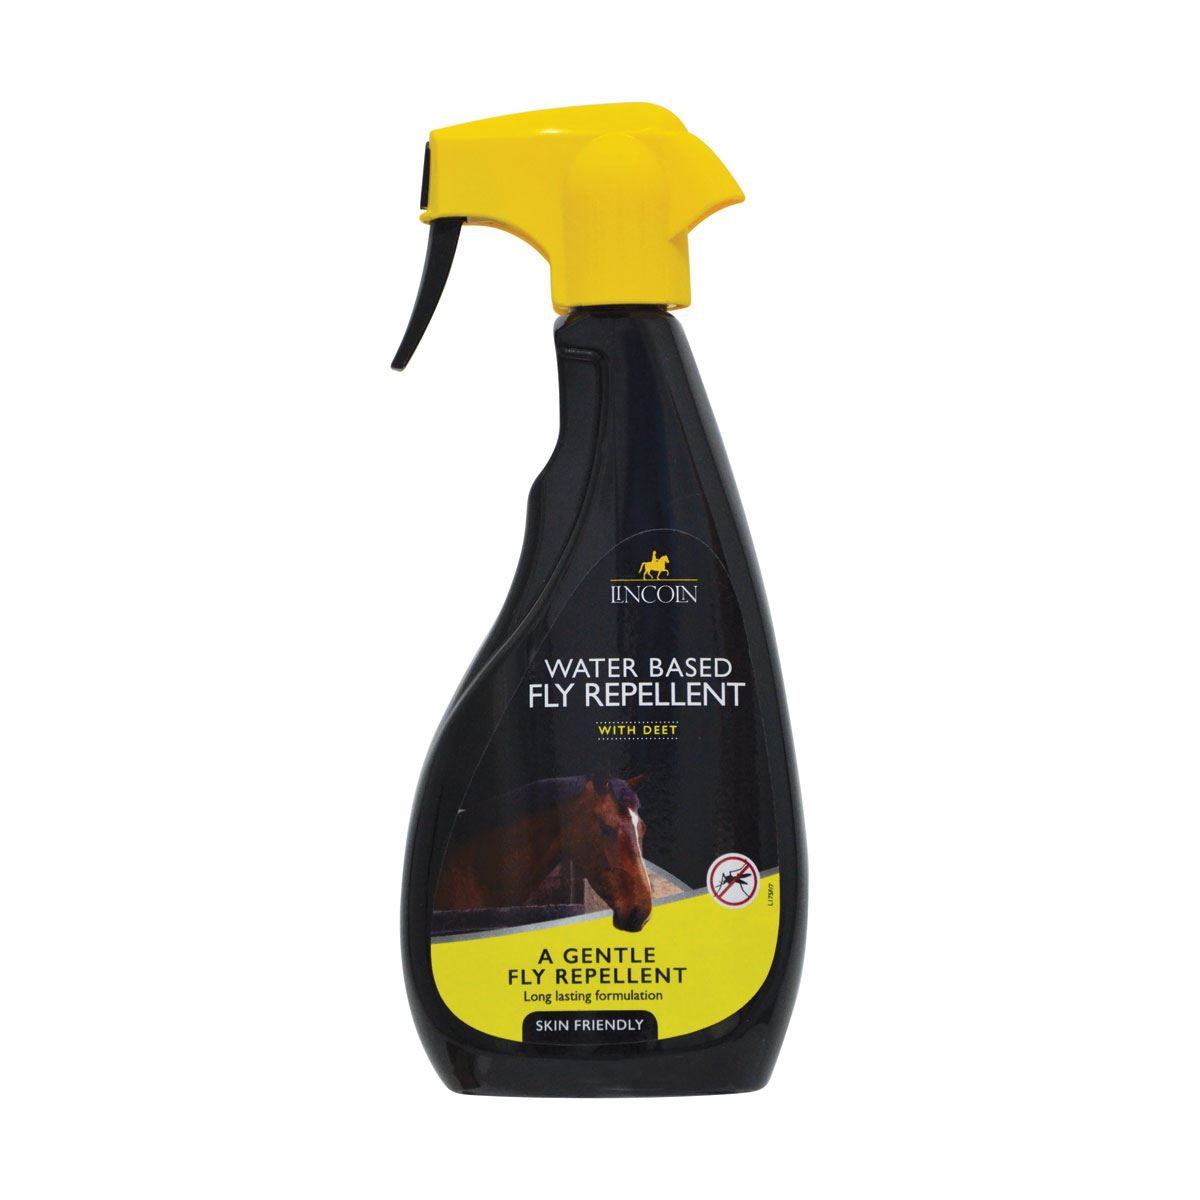 Lincoln Water Based Fly Repellent - Just Horse Riders